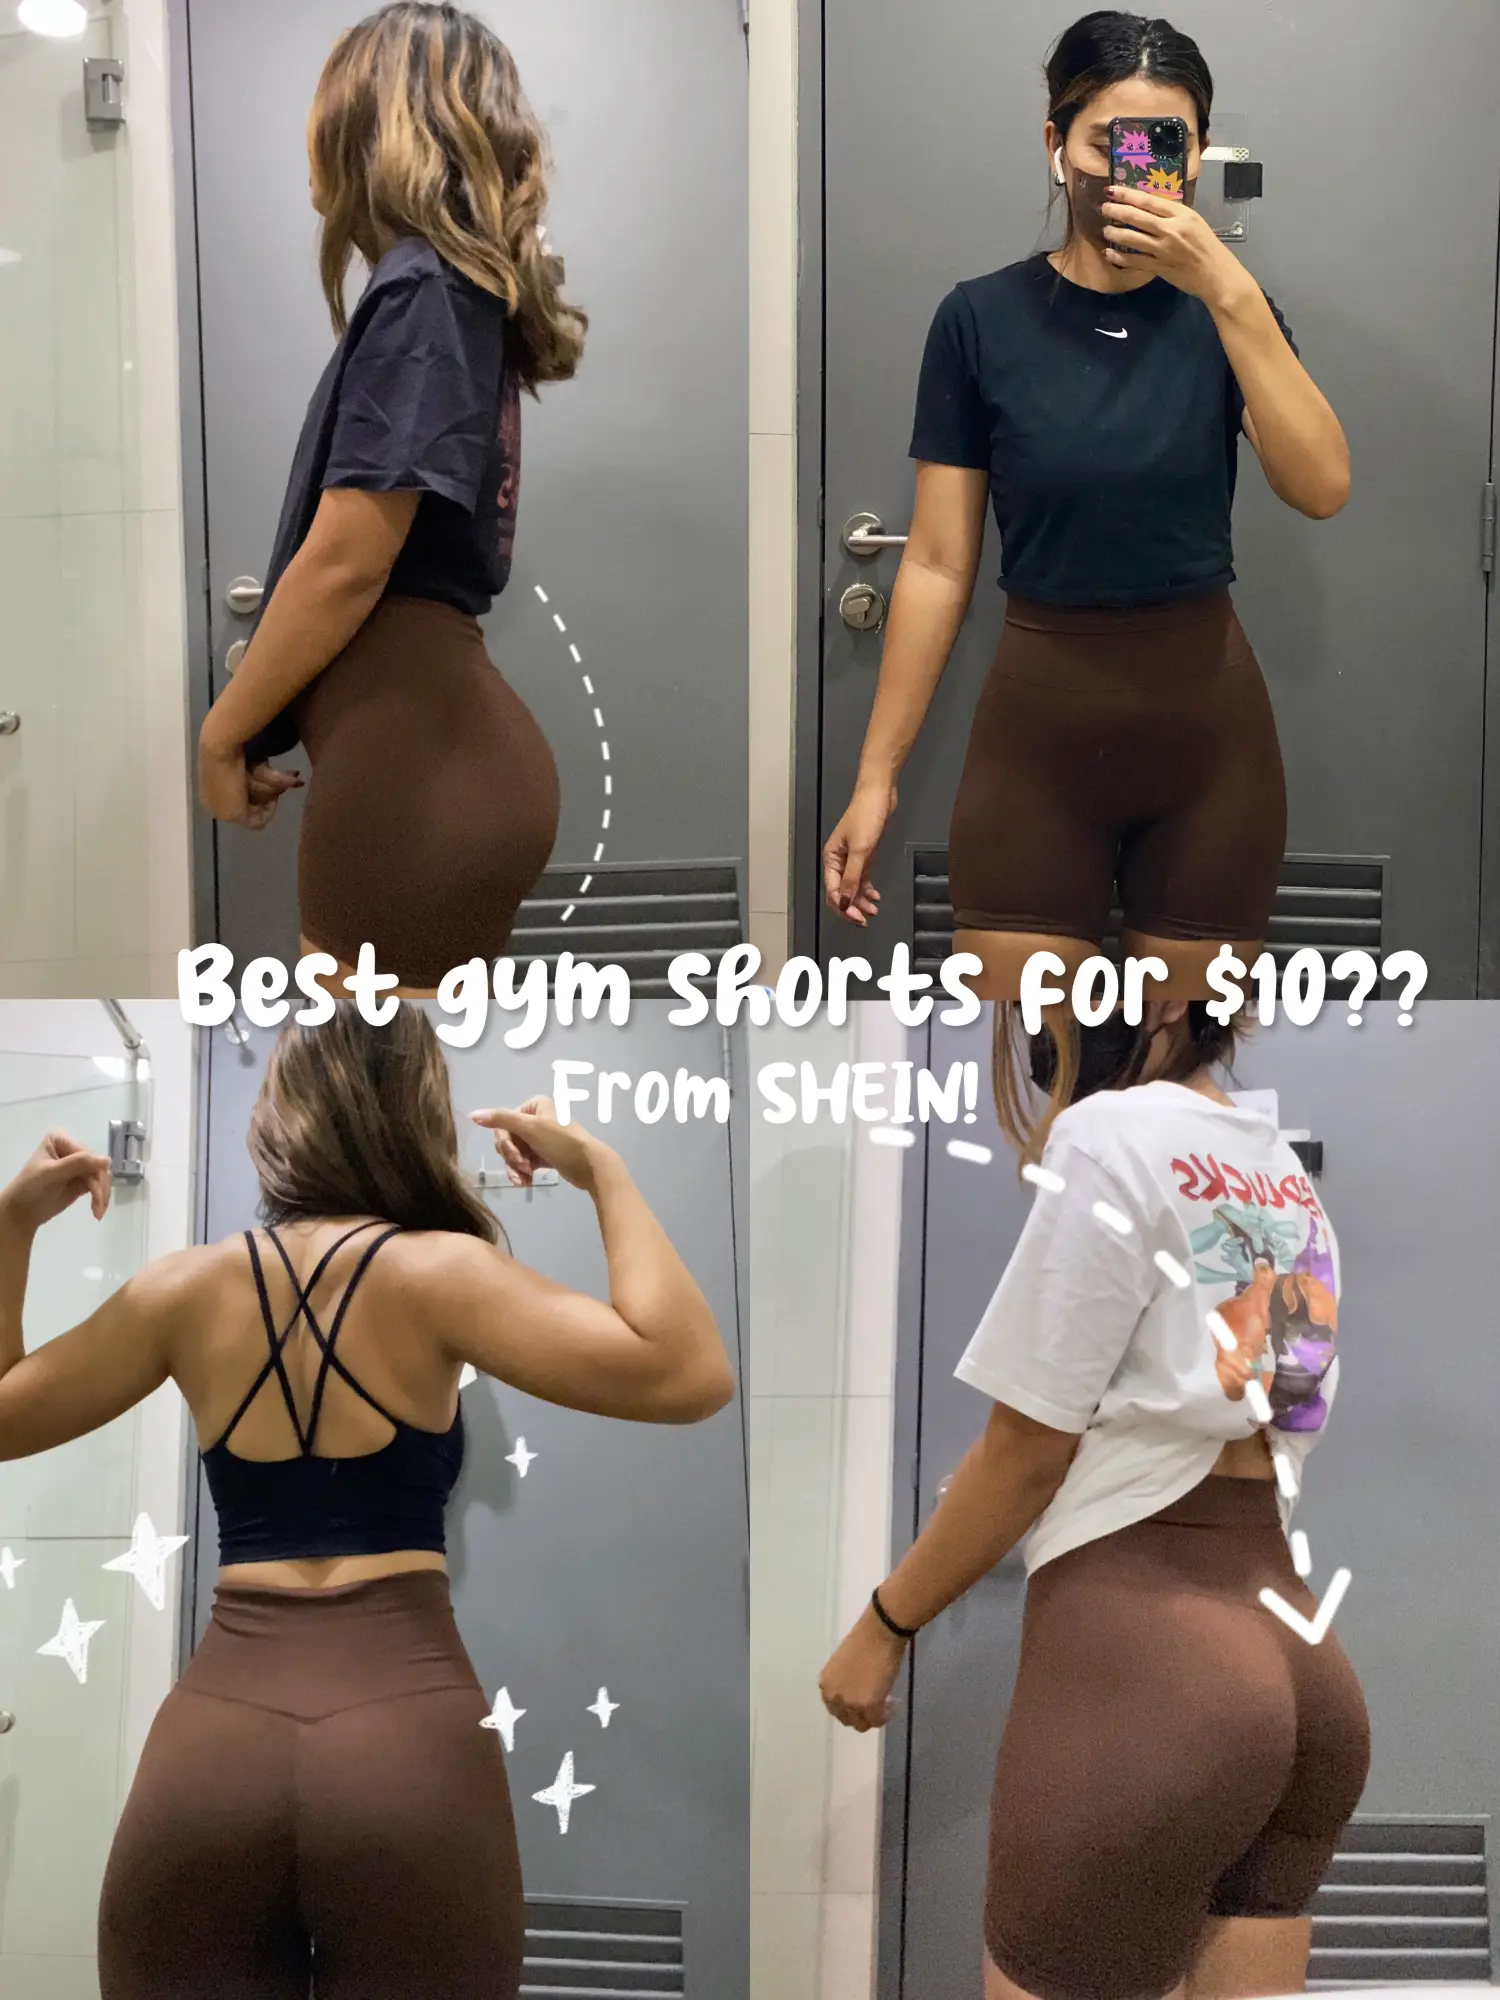 my top 5 favorite shein activewear shorts!! most are under $10 and